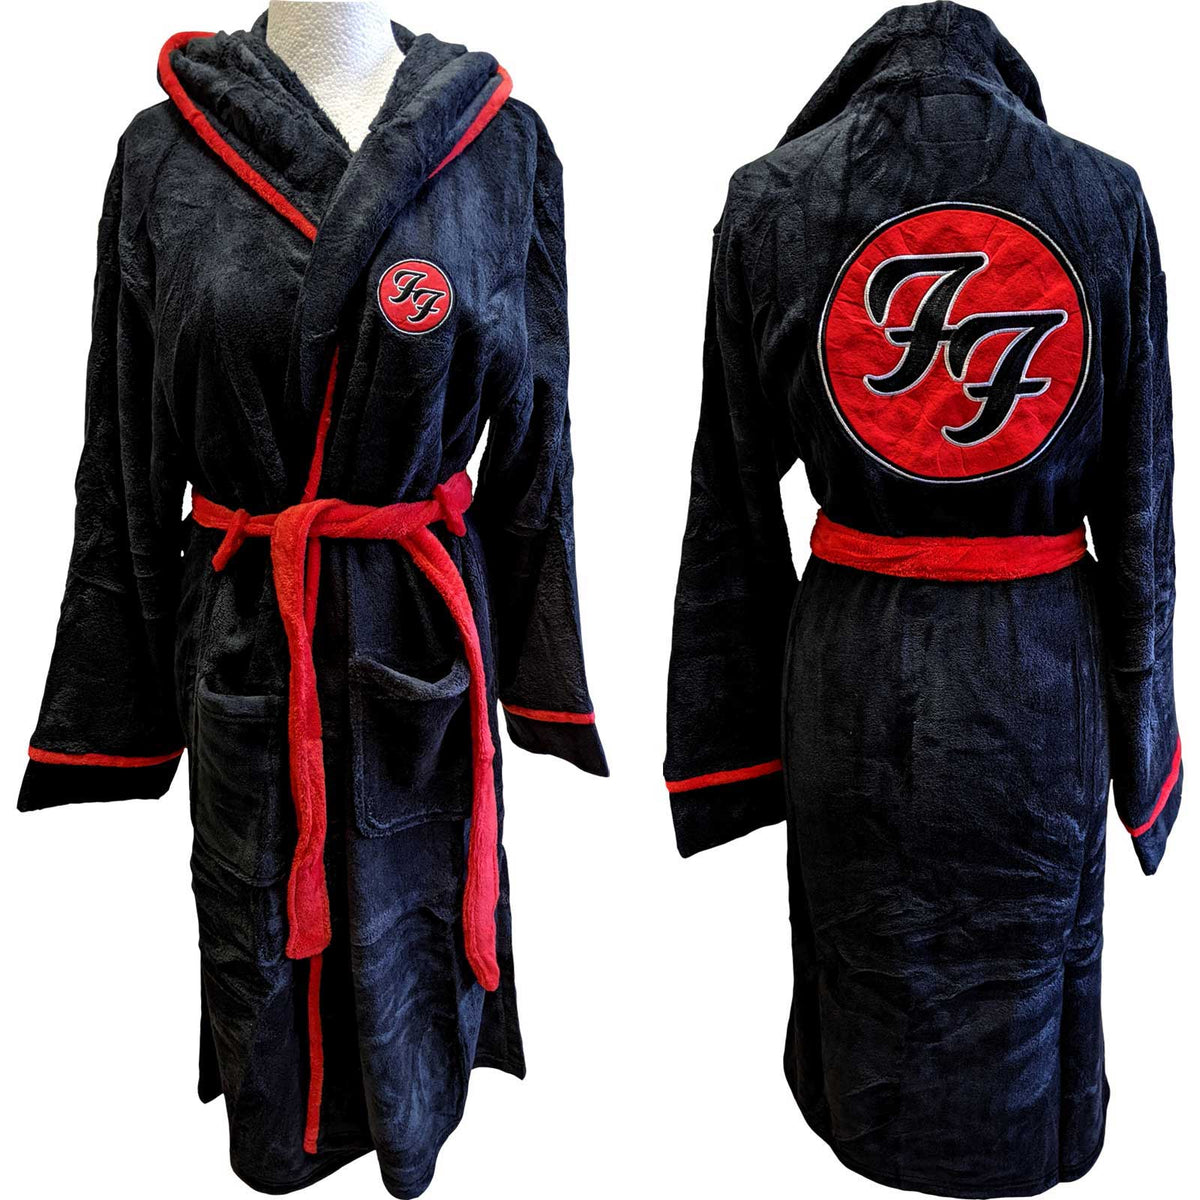 Foo Fighters Bathrobe - Official Licensed Music Design - Worldwide Shipping